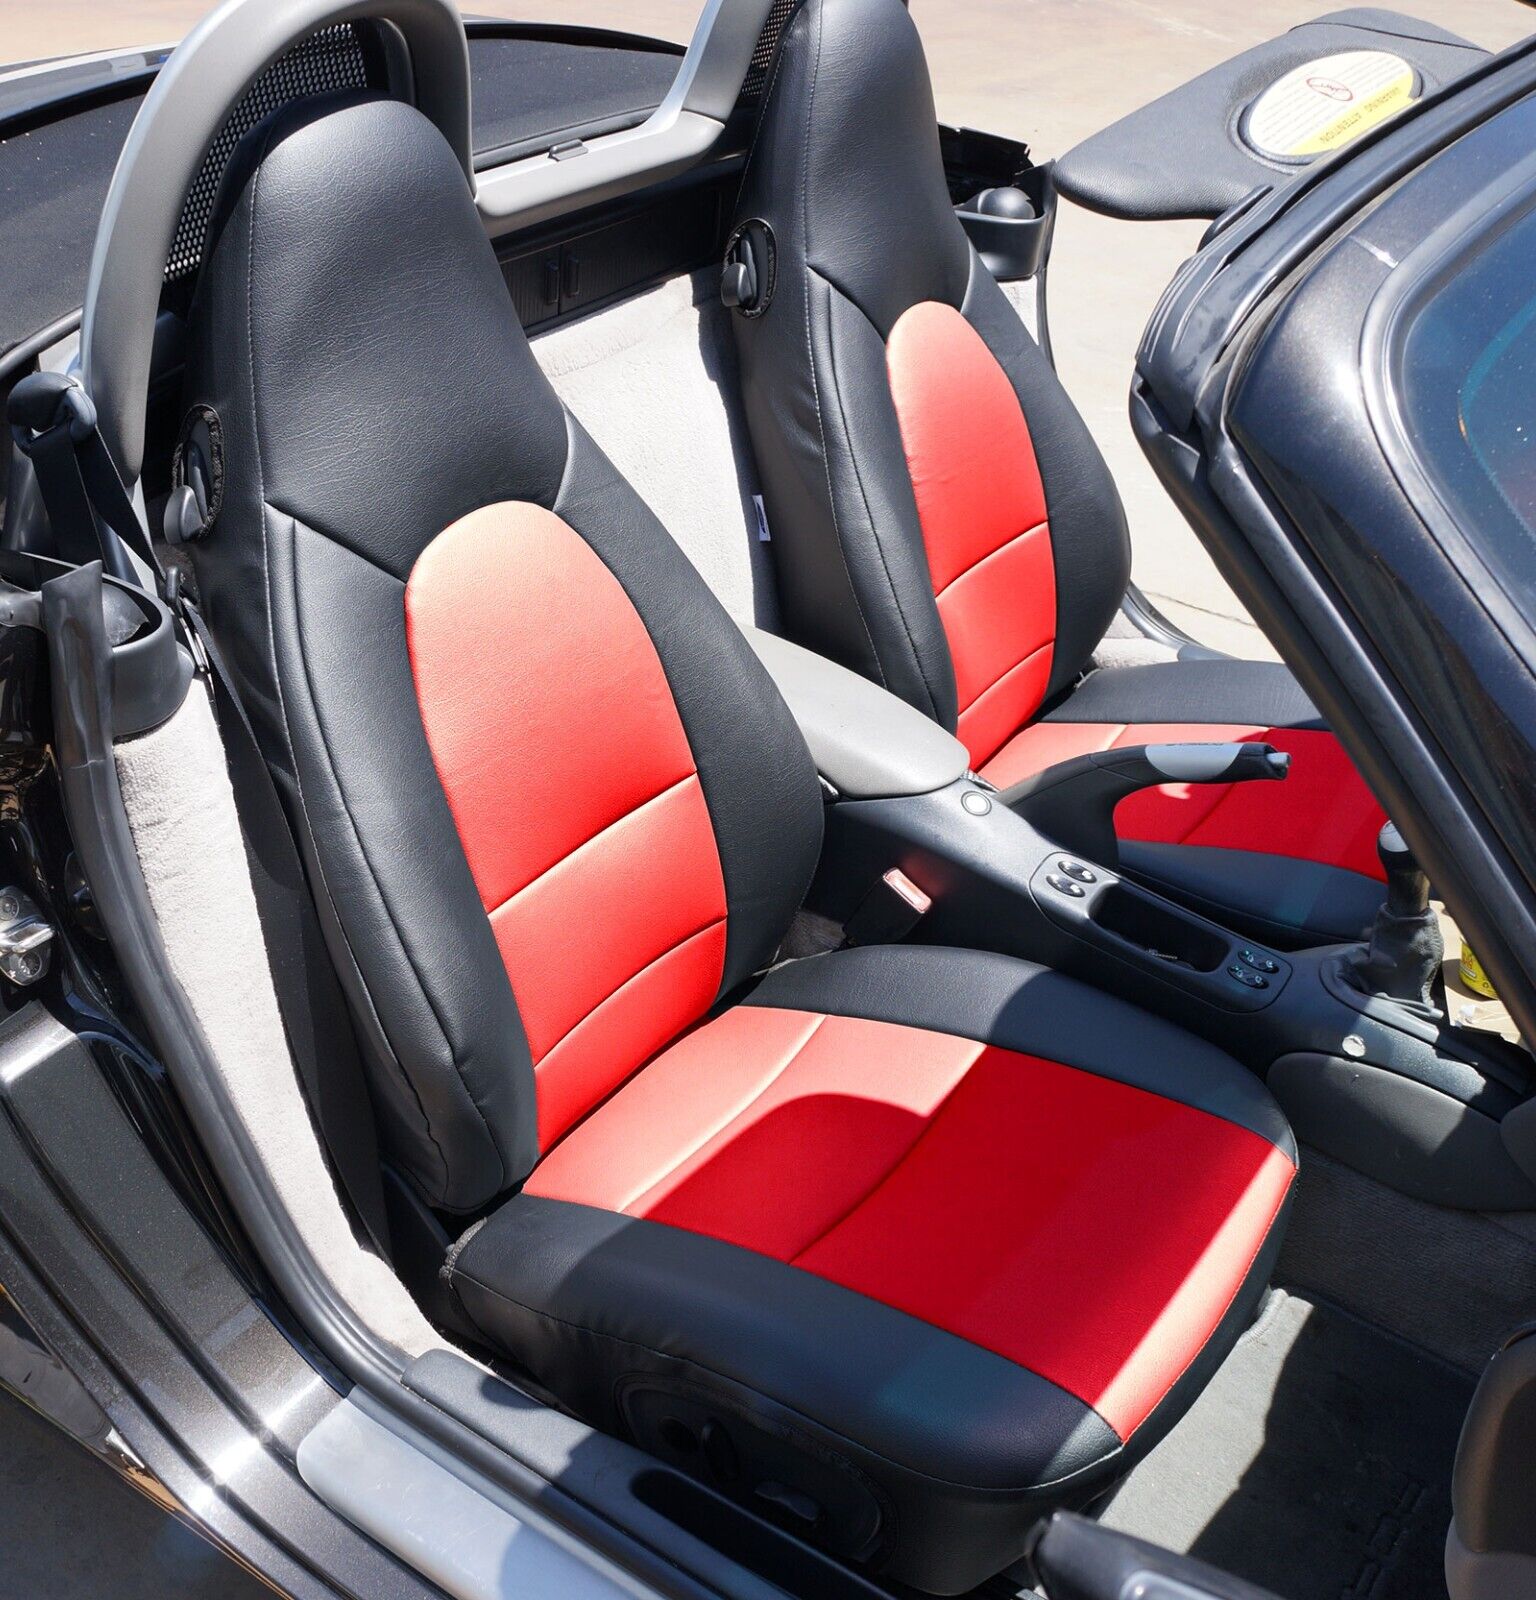 for PORSCHE BOXSTER 1997-2004 BLACK/RED IGGEE CUSTOM MADE FIT 2 FRONT SEAT COVER